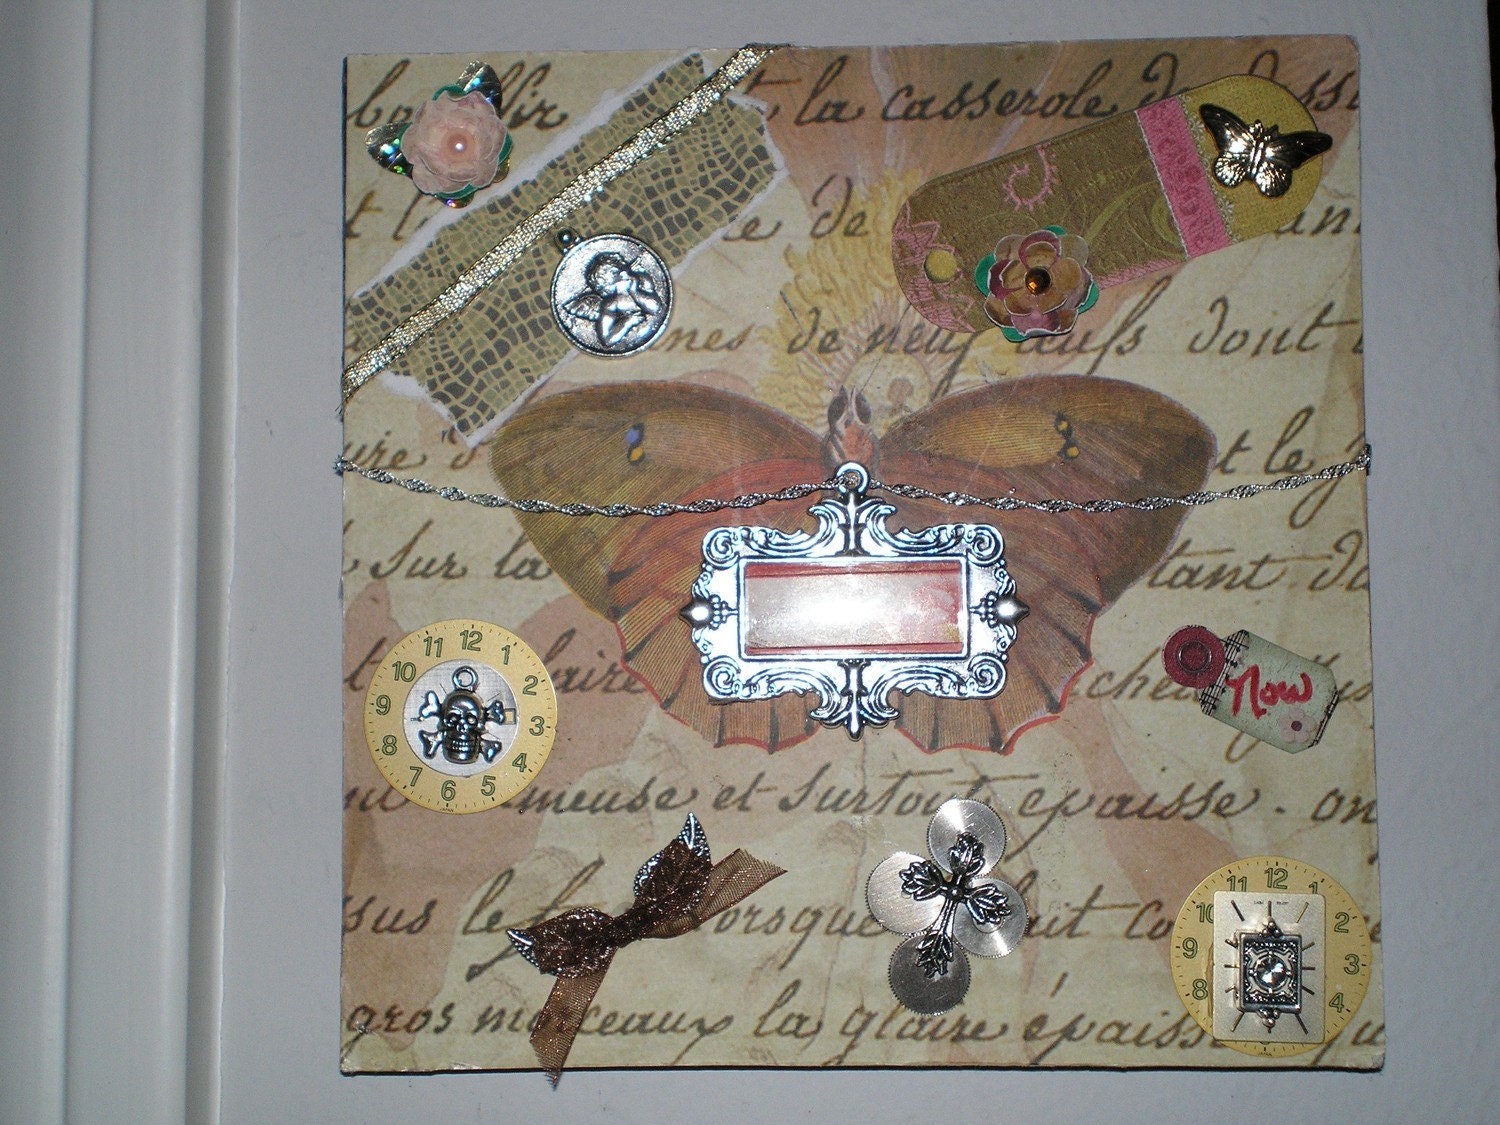 She Dreams of Flight 4 - Part 4 in my 4-part series of OOAK Signed Altered Art Collage Mixed Media Plaques with Jewelry Butterflies Dragonflies Skulls Paper Flowers Heart Watch Parts Chains